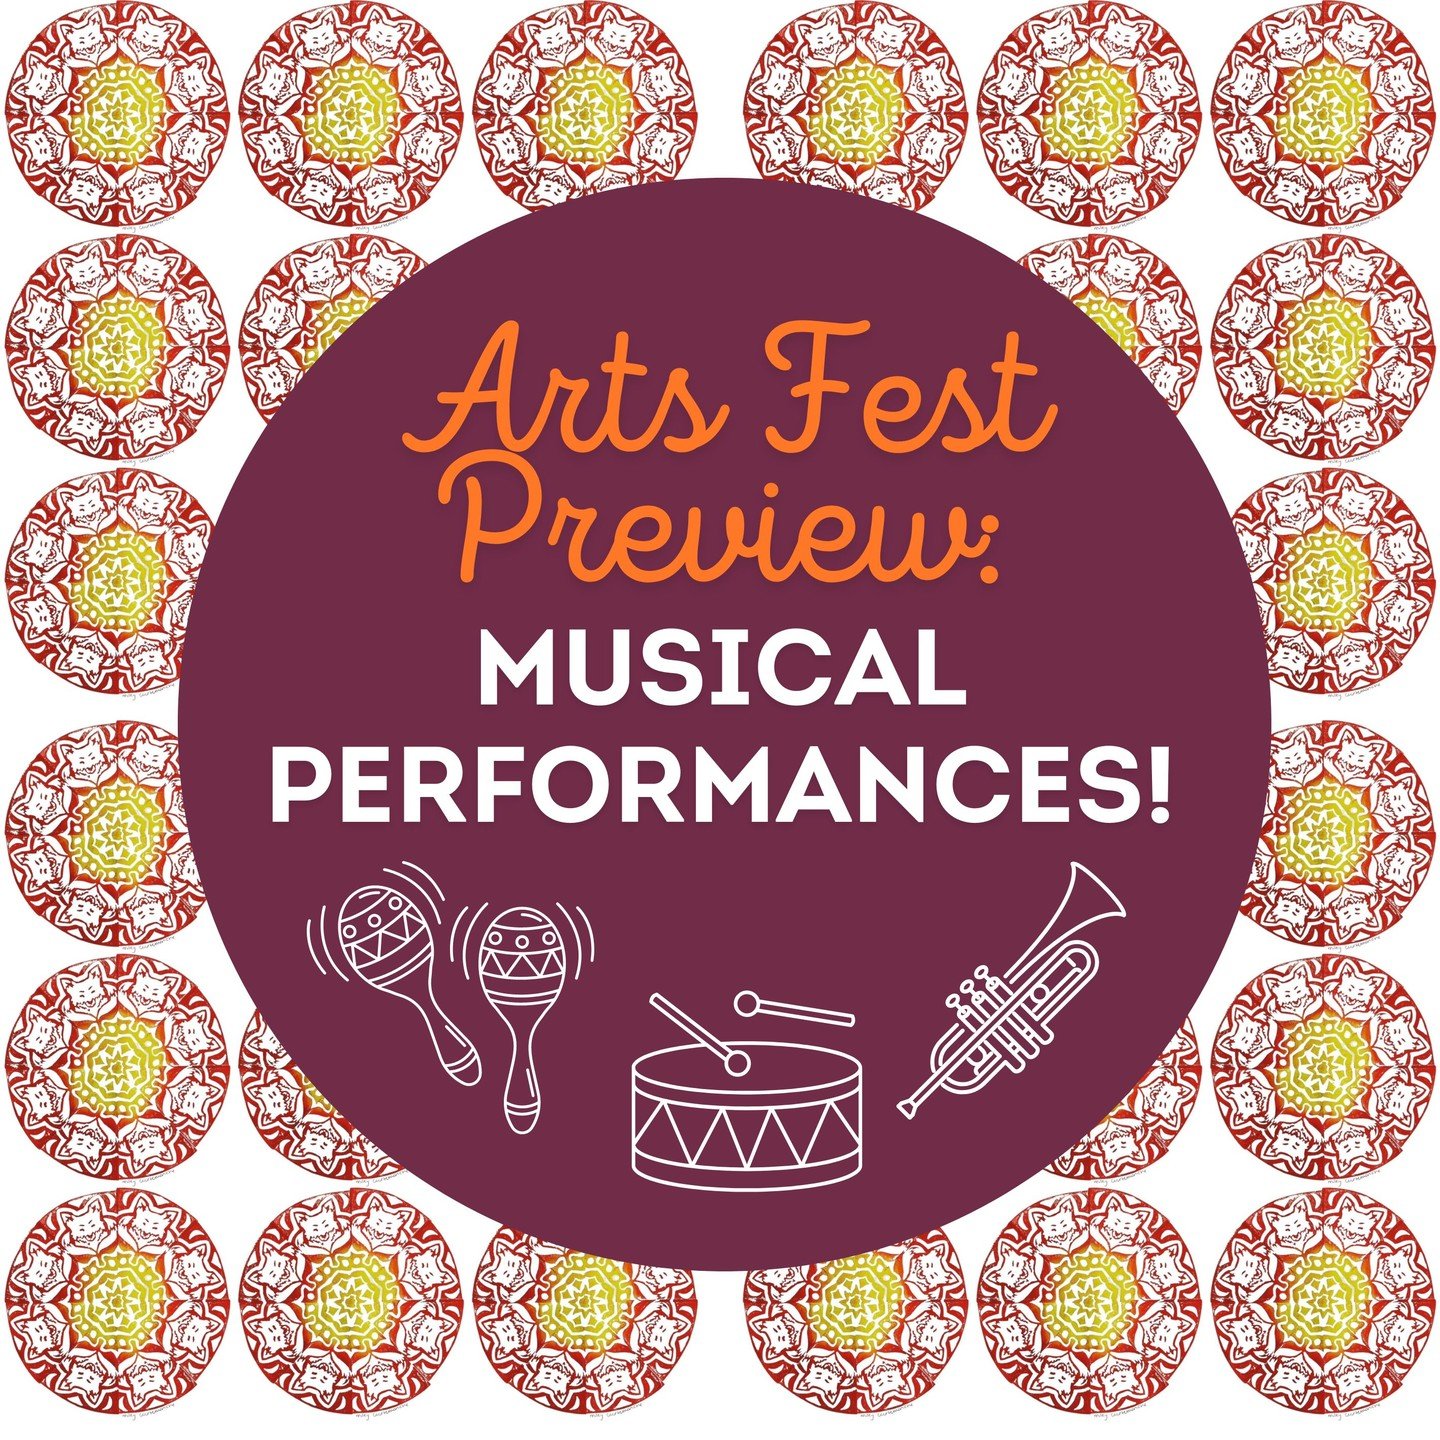 We're counting down the days until Arts Fest 2024 this weekend with a week of festival highlights to get you ready...Day One: Musical Performances! 

Gloucester's wonderful music programs will be front-and-center this year, with chorus, recorders, an